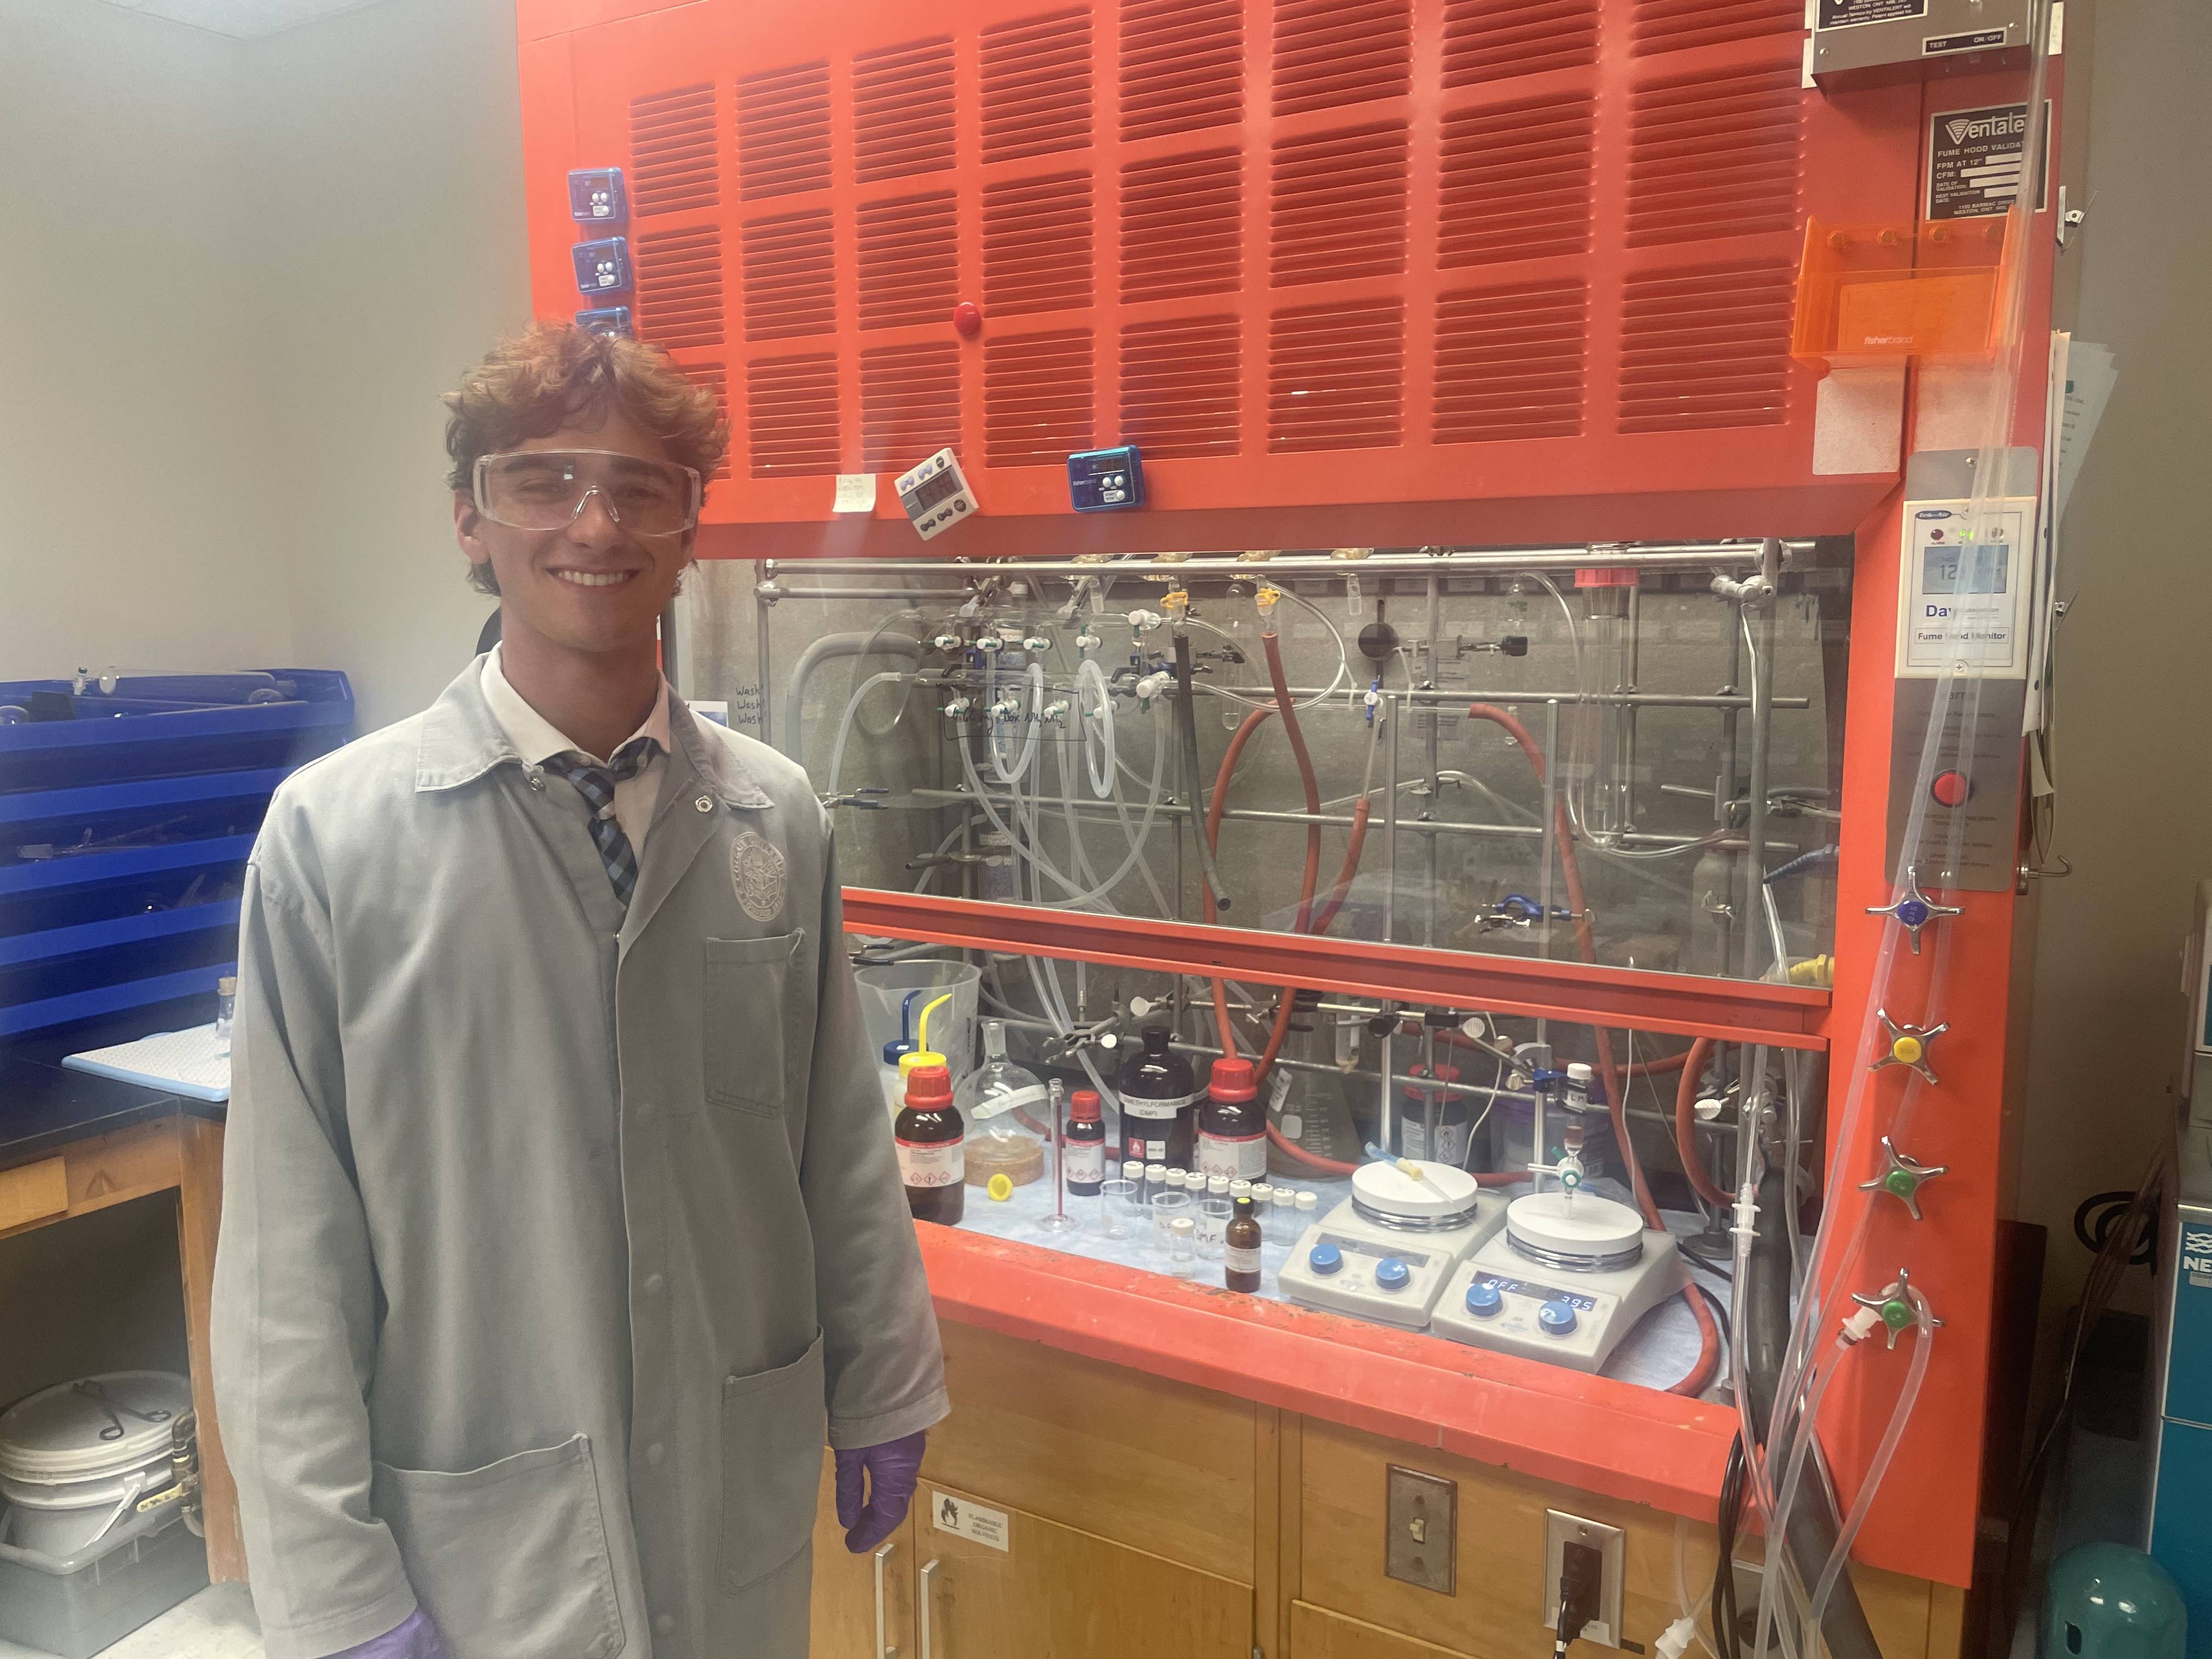 Scholar Liam McCarthy poses in front of a hood full of chemicals